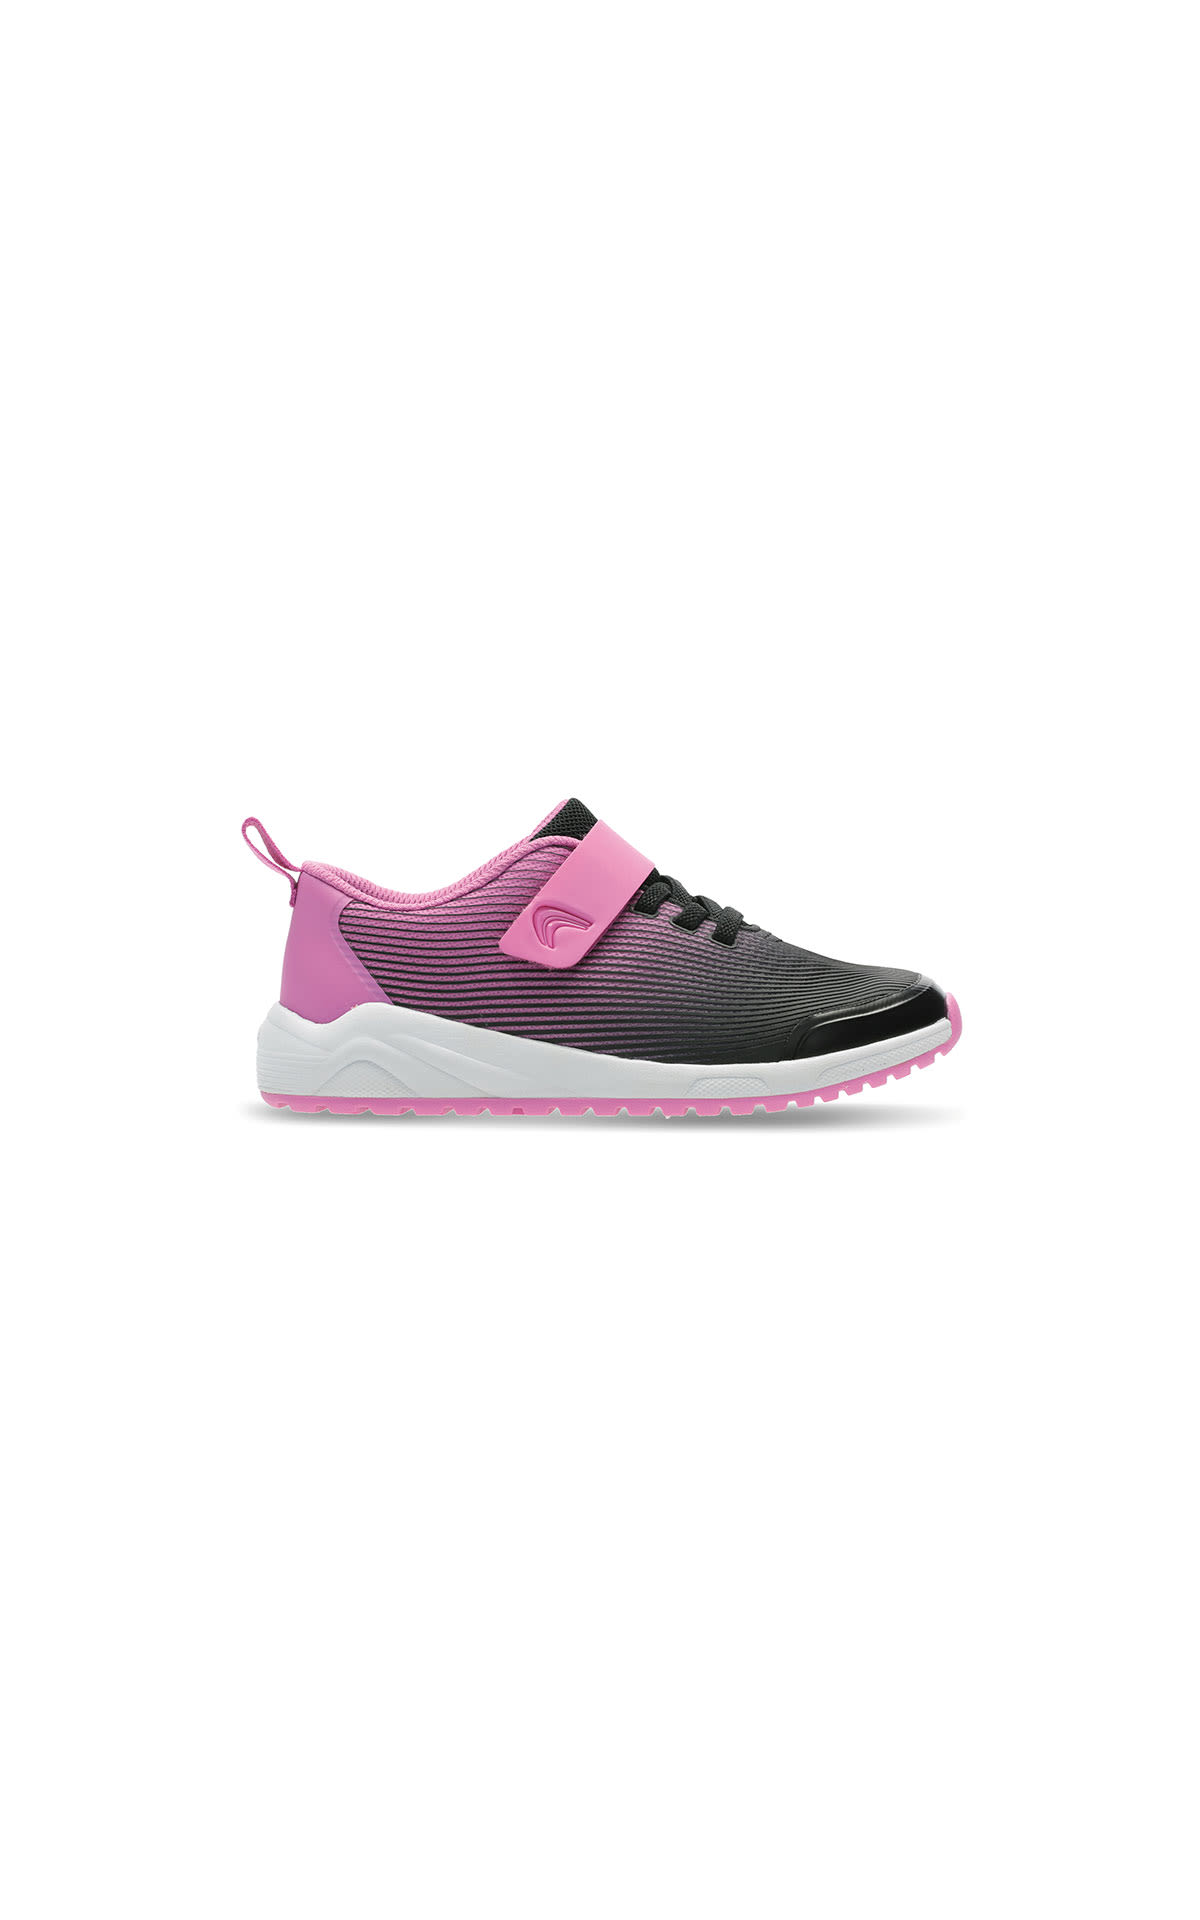 Clarks Aeon pace pink from Bicester Village